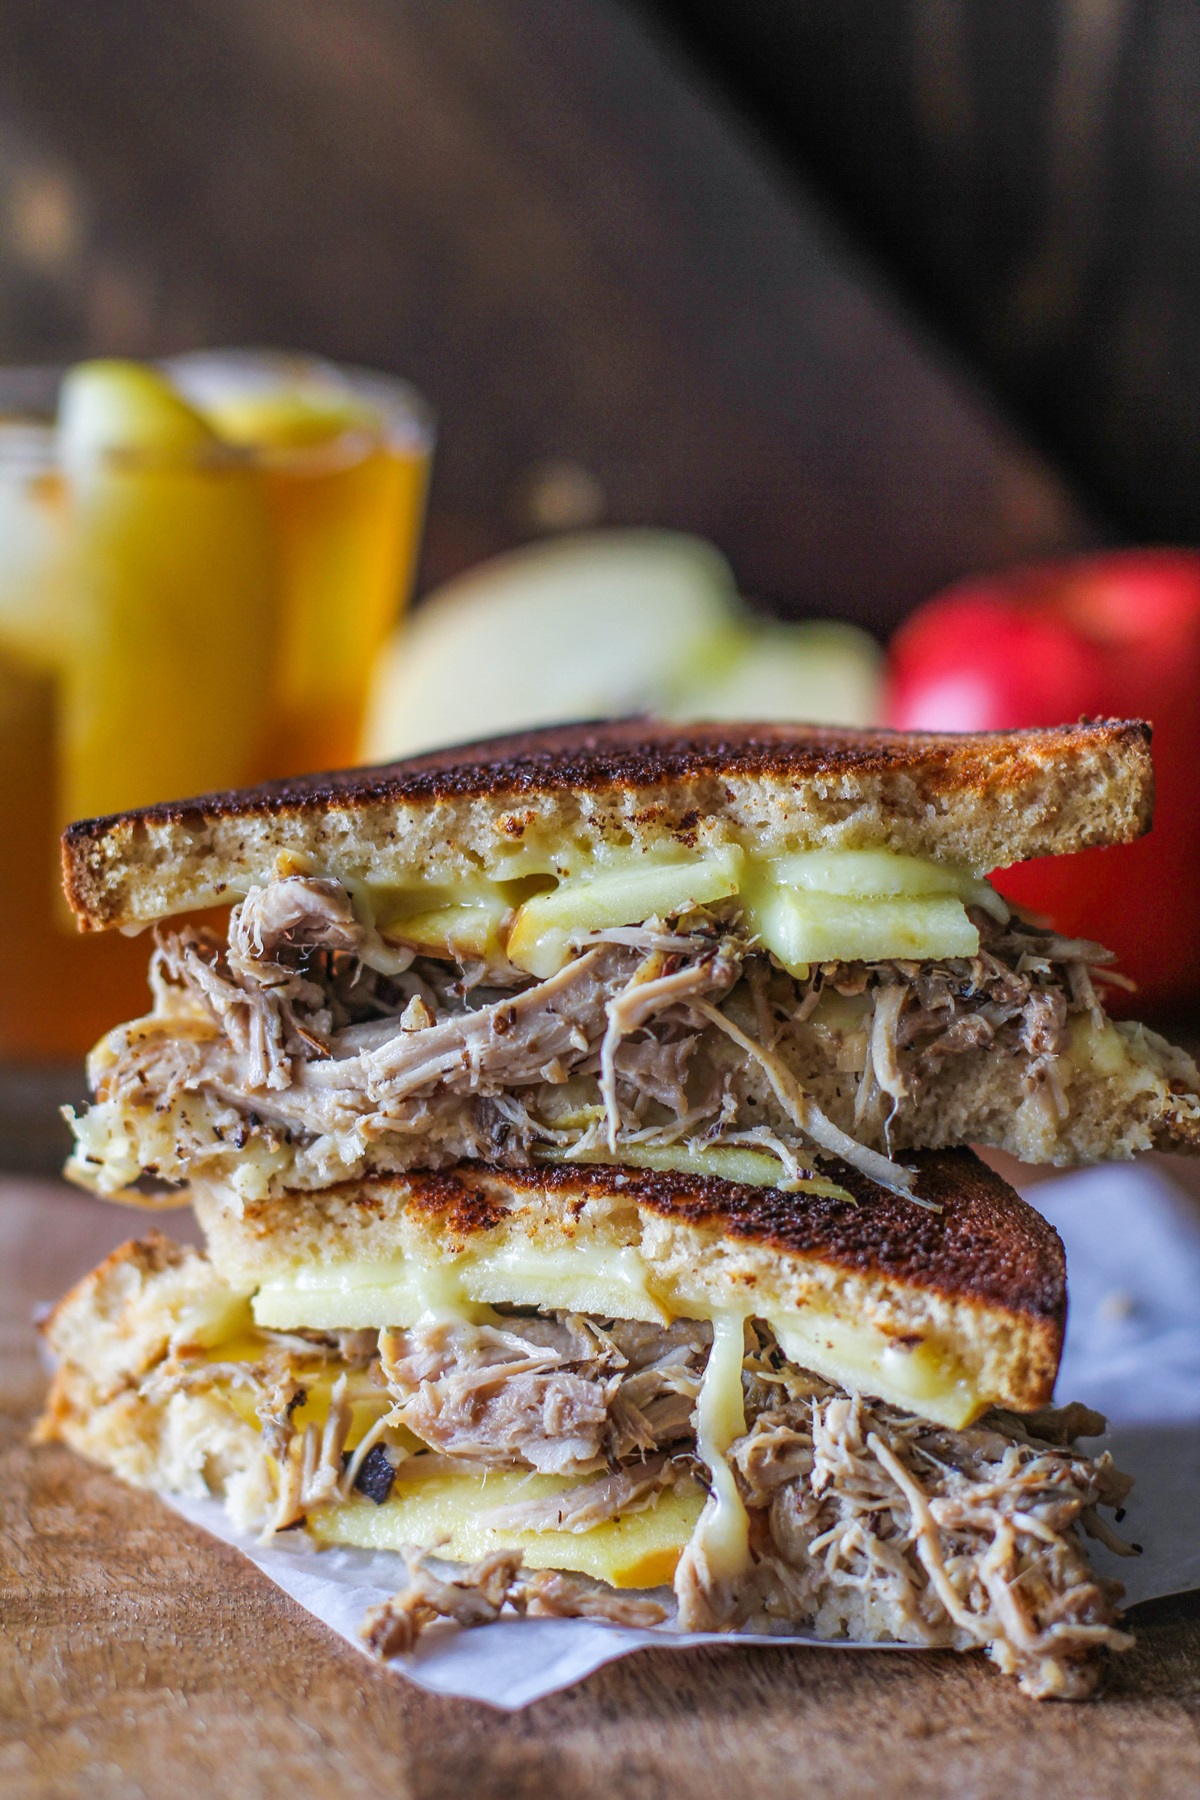 Pulled pork sandwich with gouda cheese and apples.